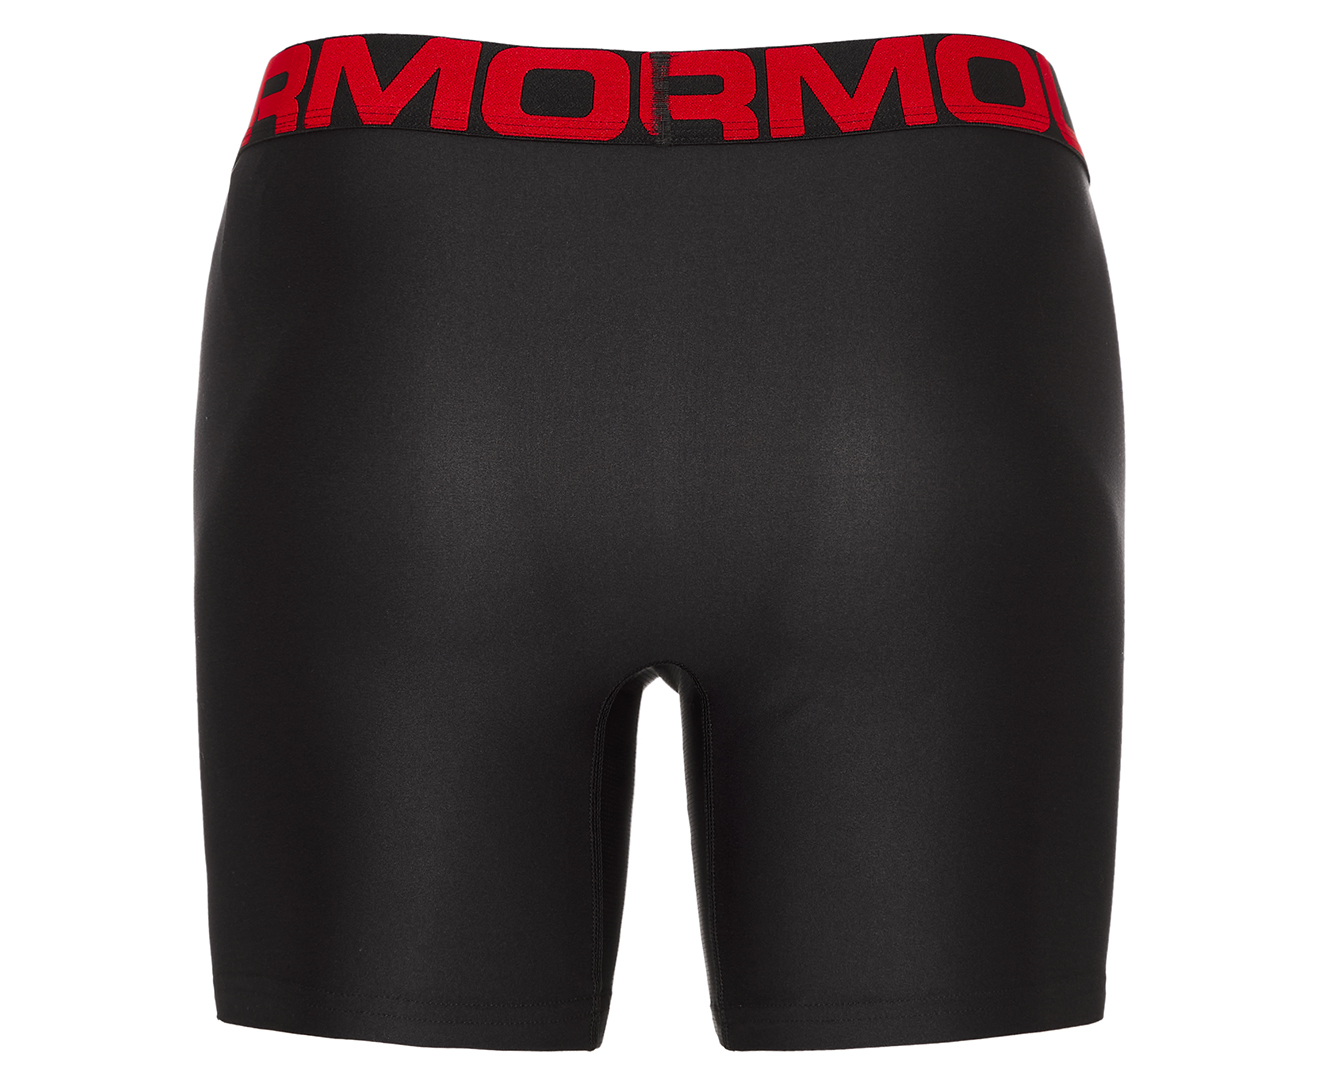 14 Best Under Armour Boxer Shorts for 2023